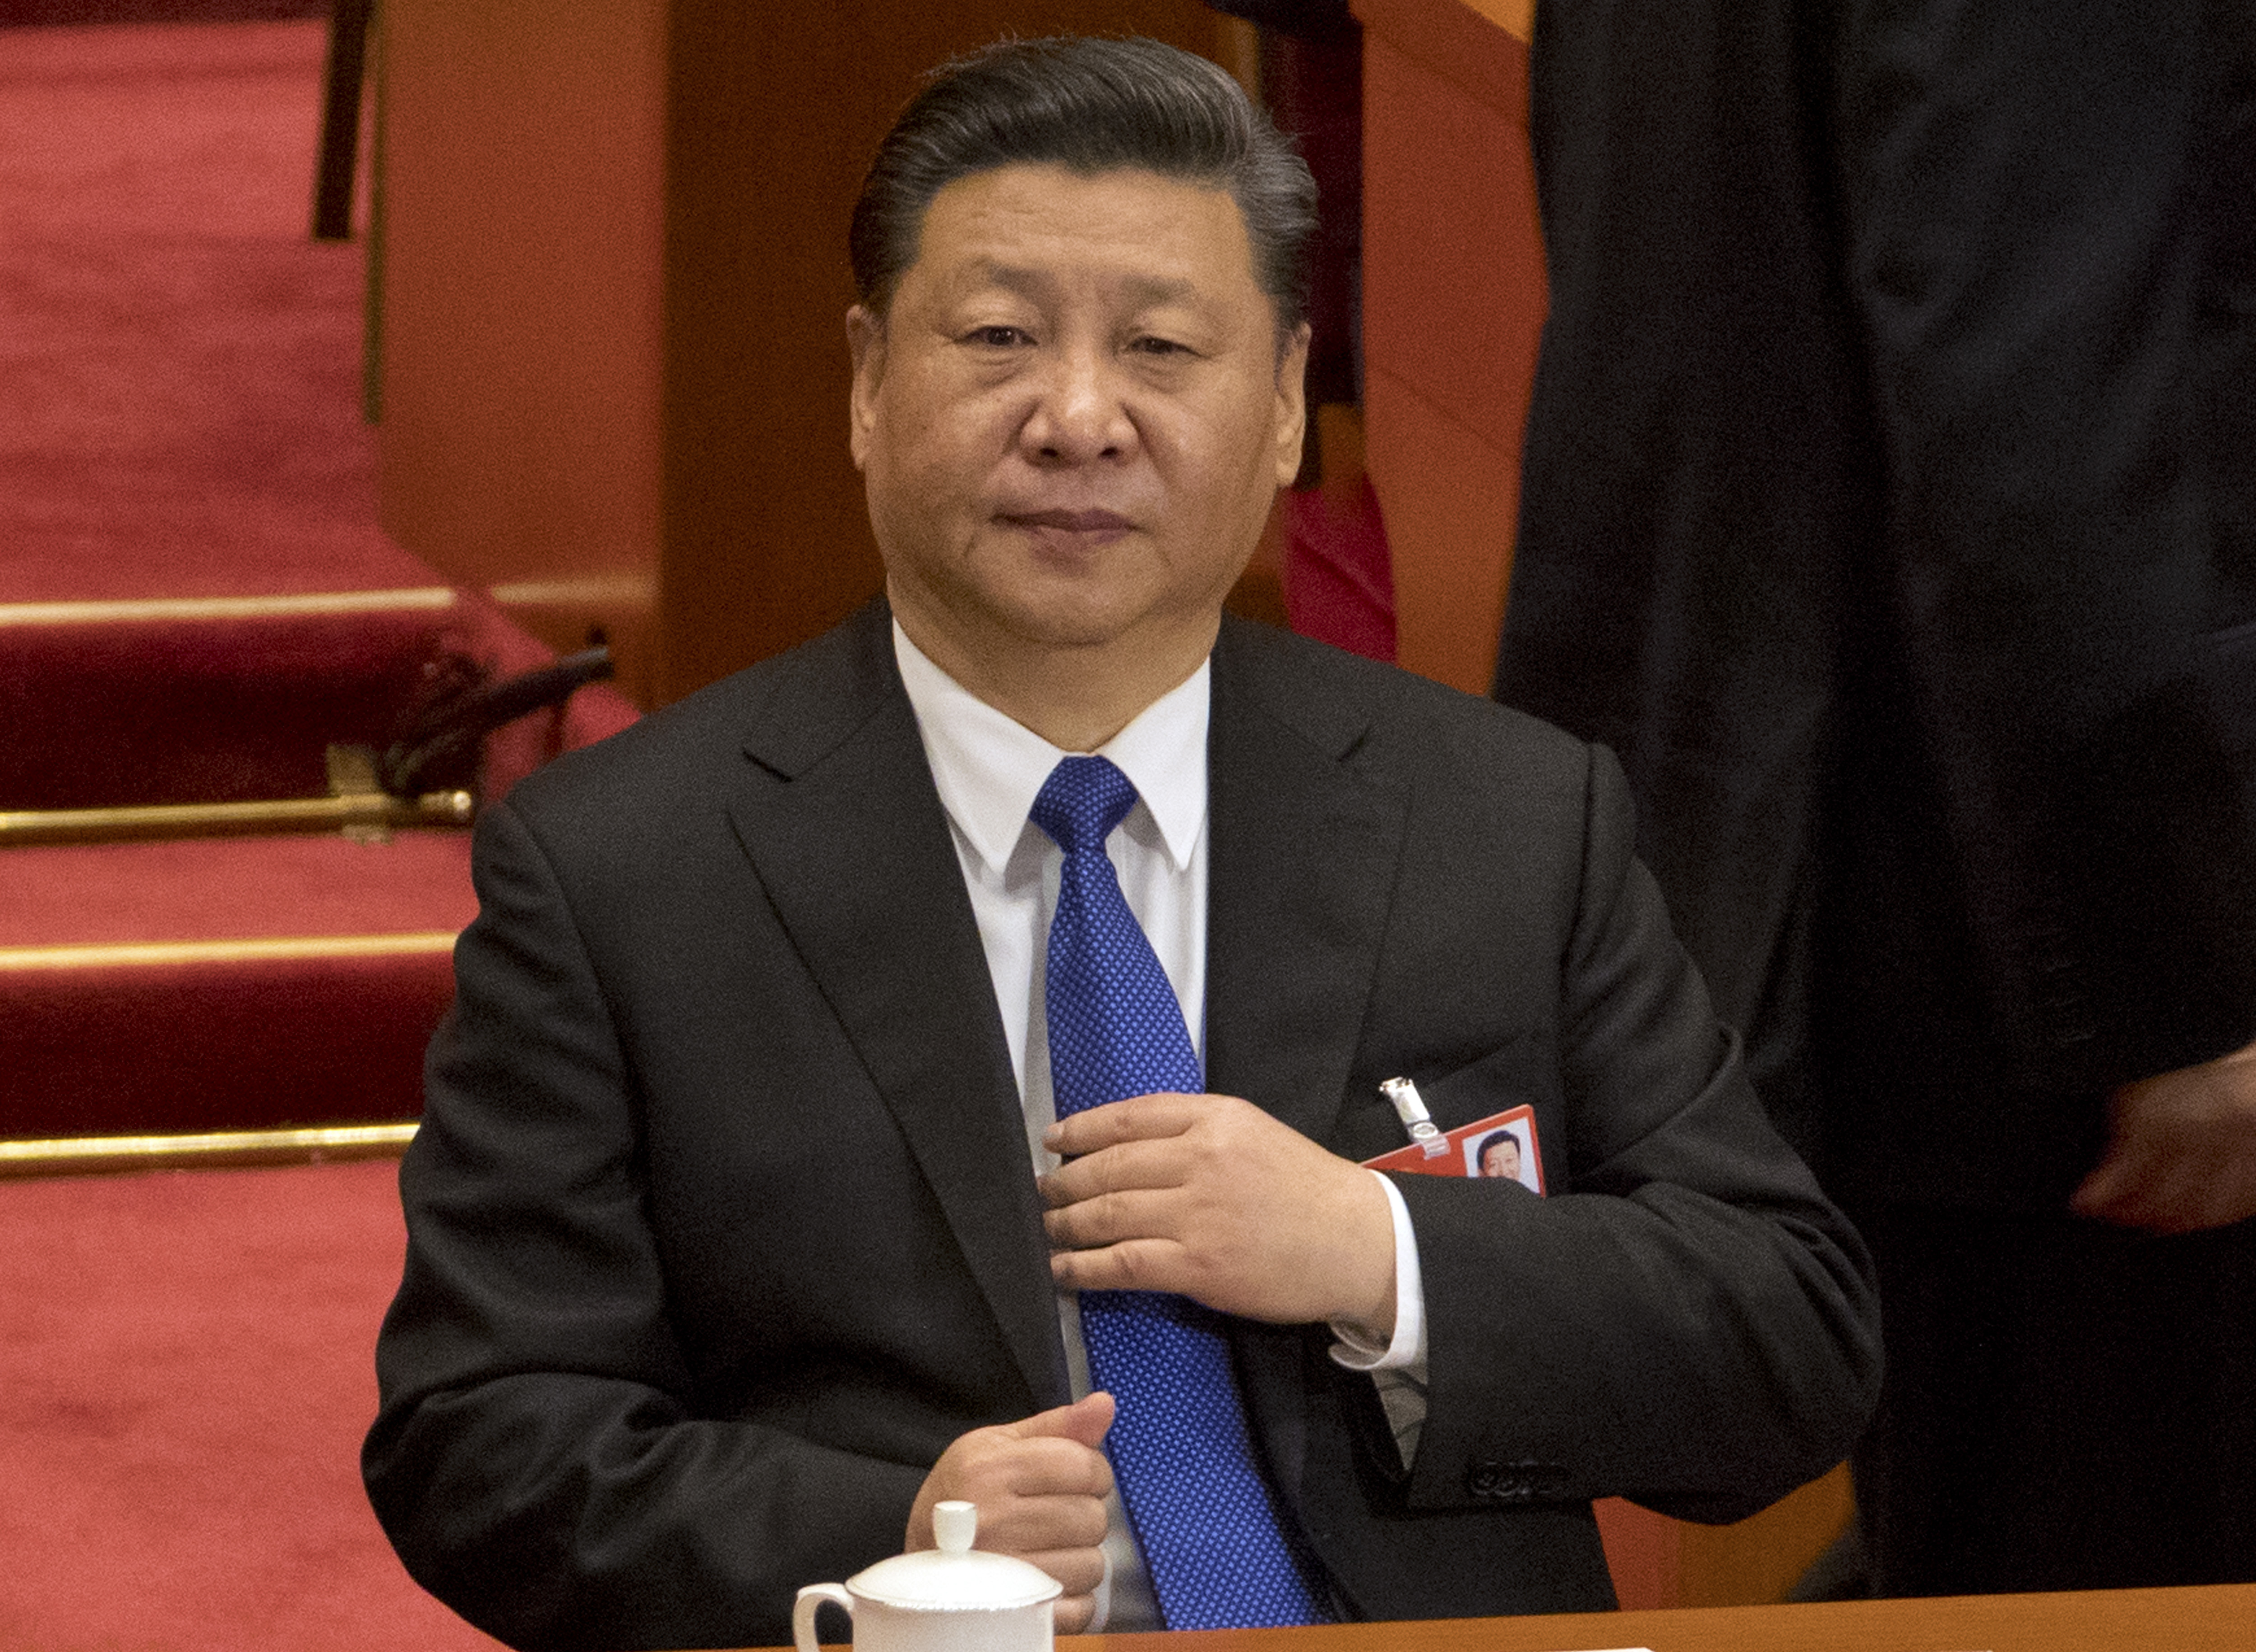 FILE - In this file photo taken Monday, March 19, 2018, Chinese President Xi Jinping attends a plenary session of China's National People's Congress (NPC) at the Great Hall of the People in Beijing. Chinese envoys have set off diplomatic firestorms with a combative defense whenever their country is accused of not acting quickly enough to stem the spread of the coronavirus pandemic. Xi's government has urged its diplomats to pursue 